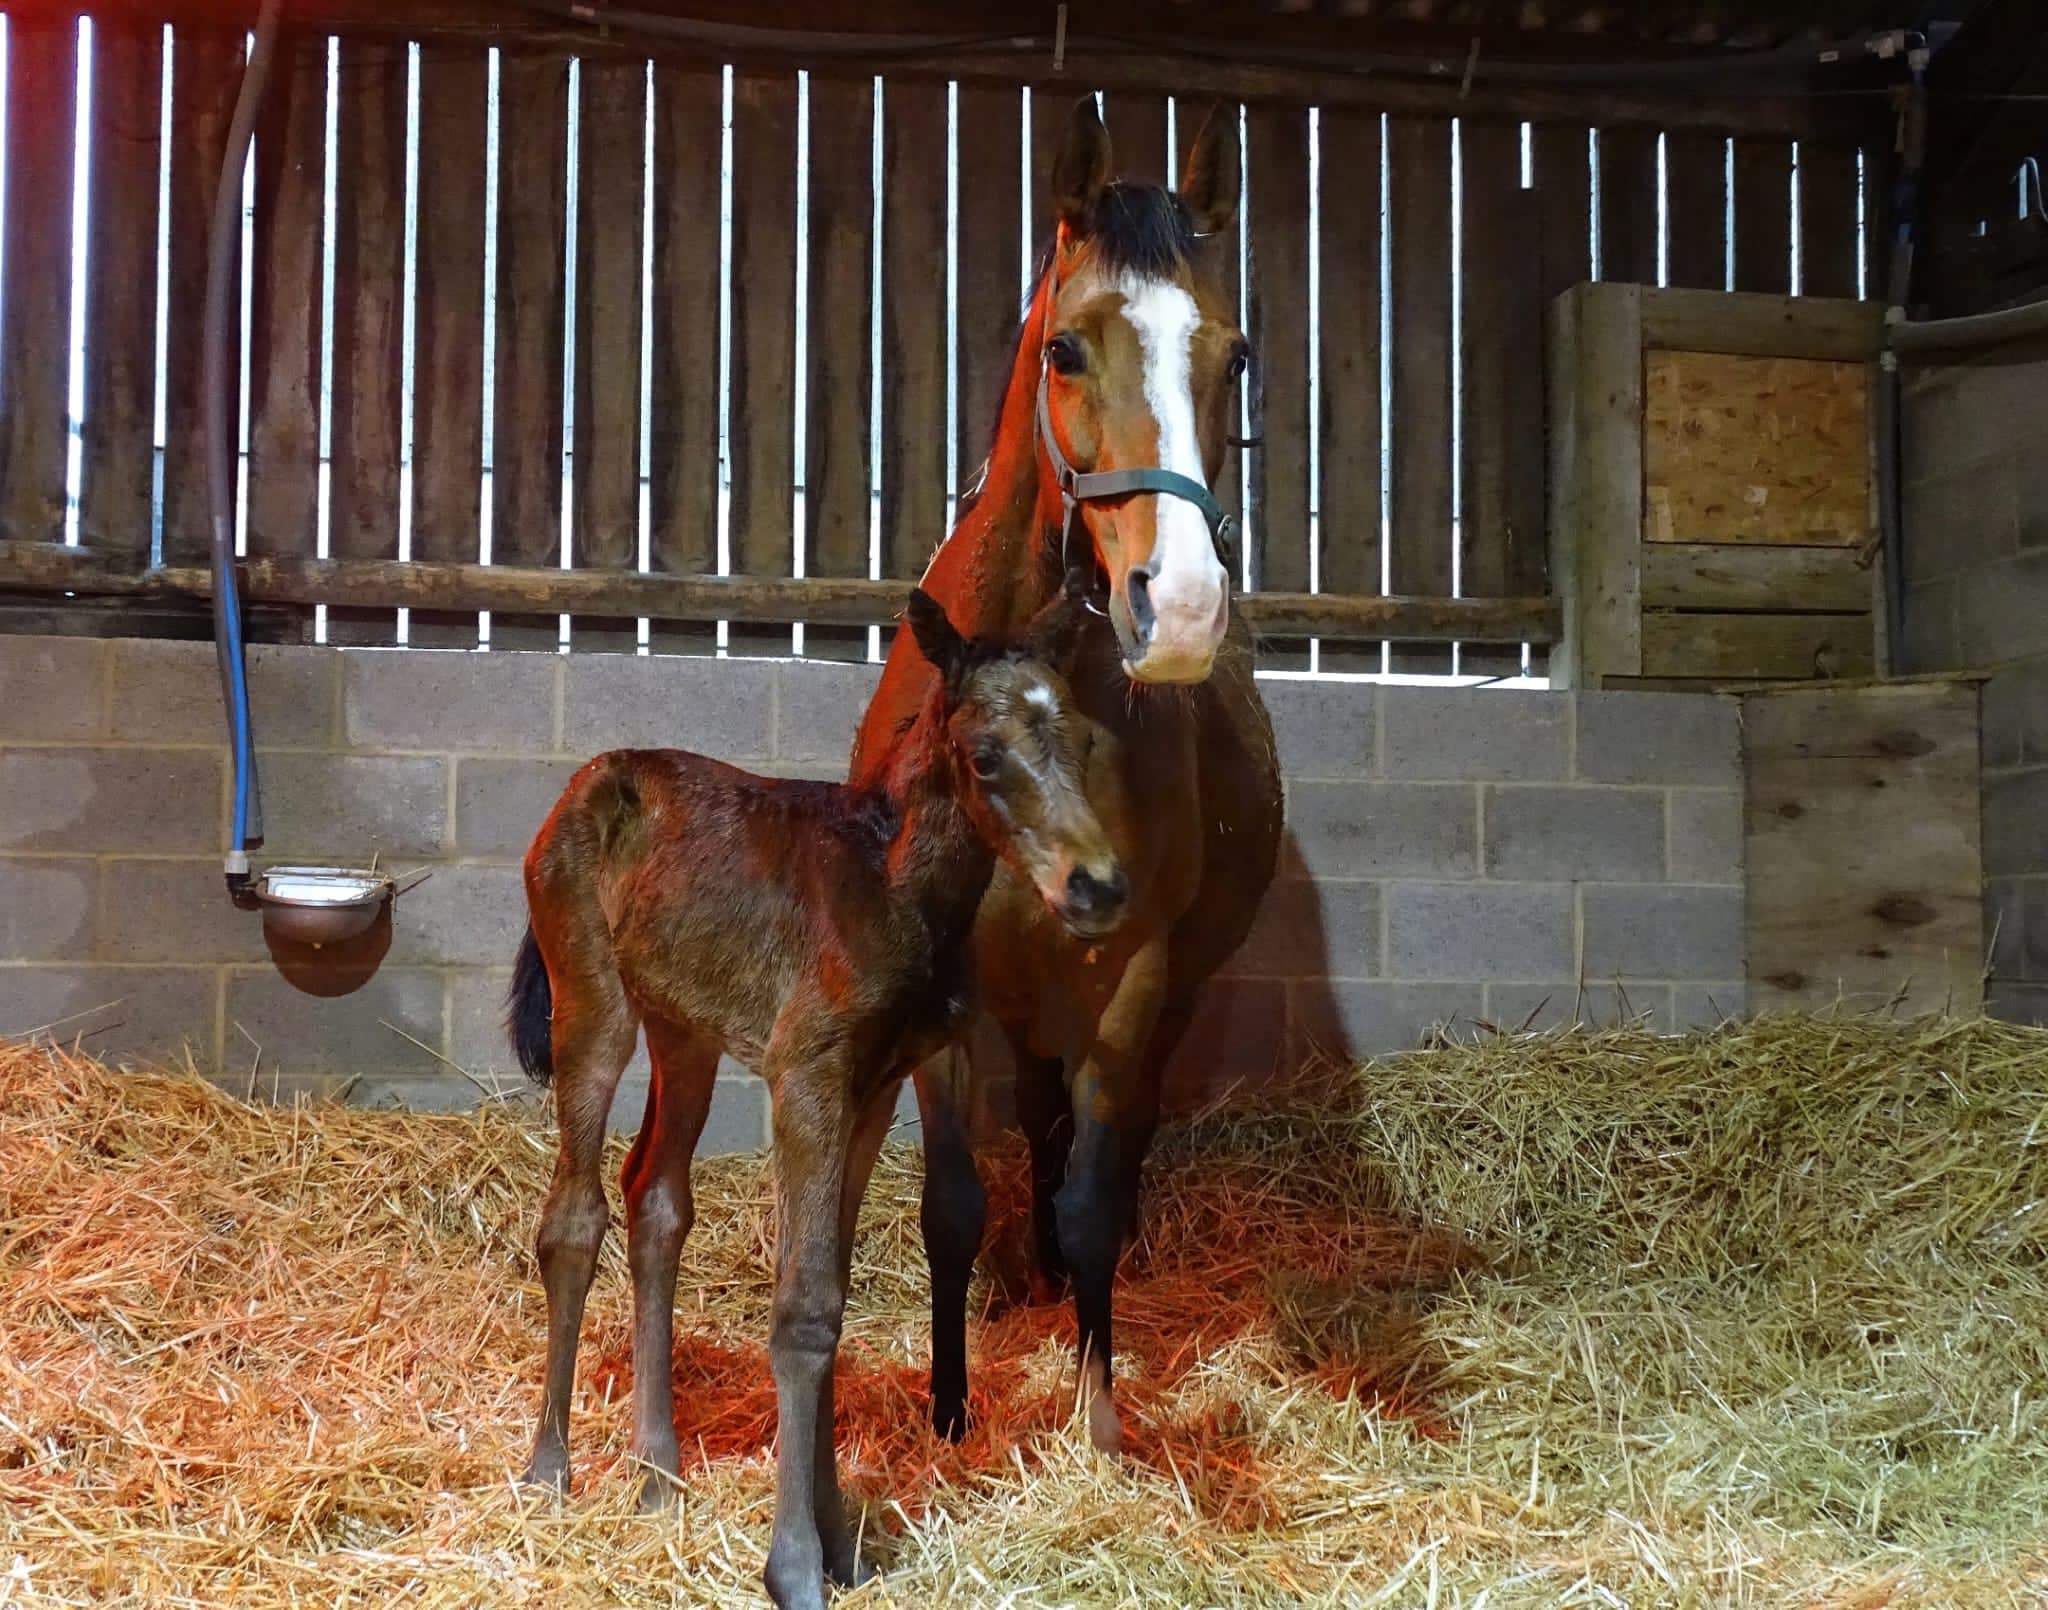 Maybell and her filly foal by Frontiersman